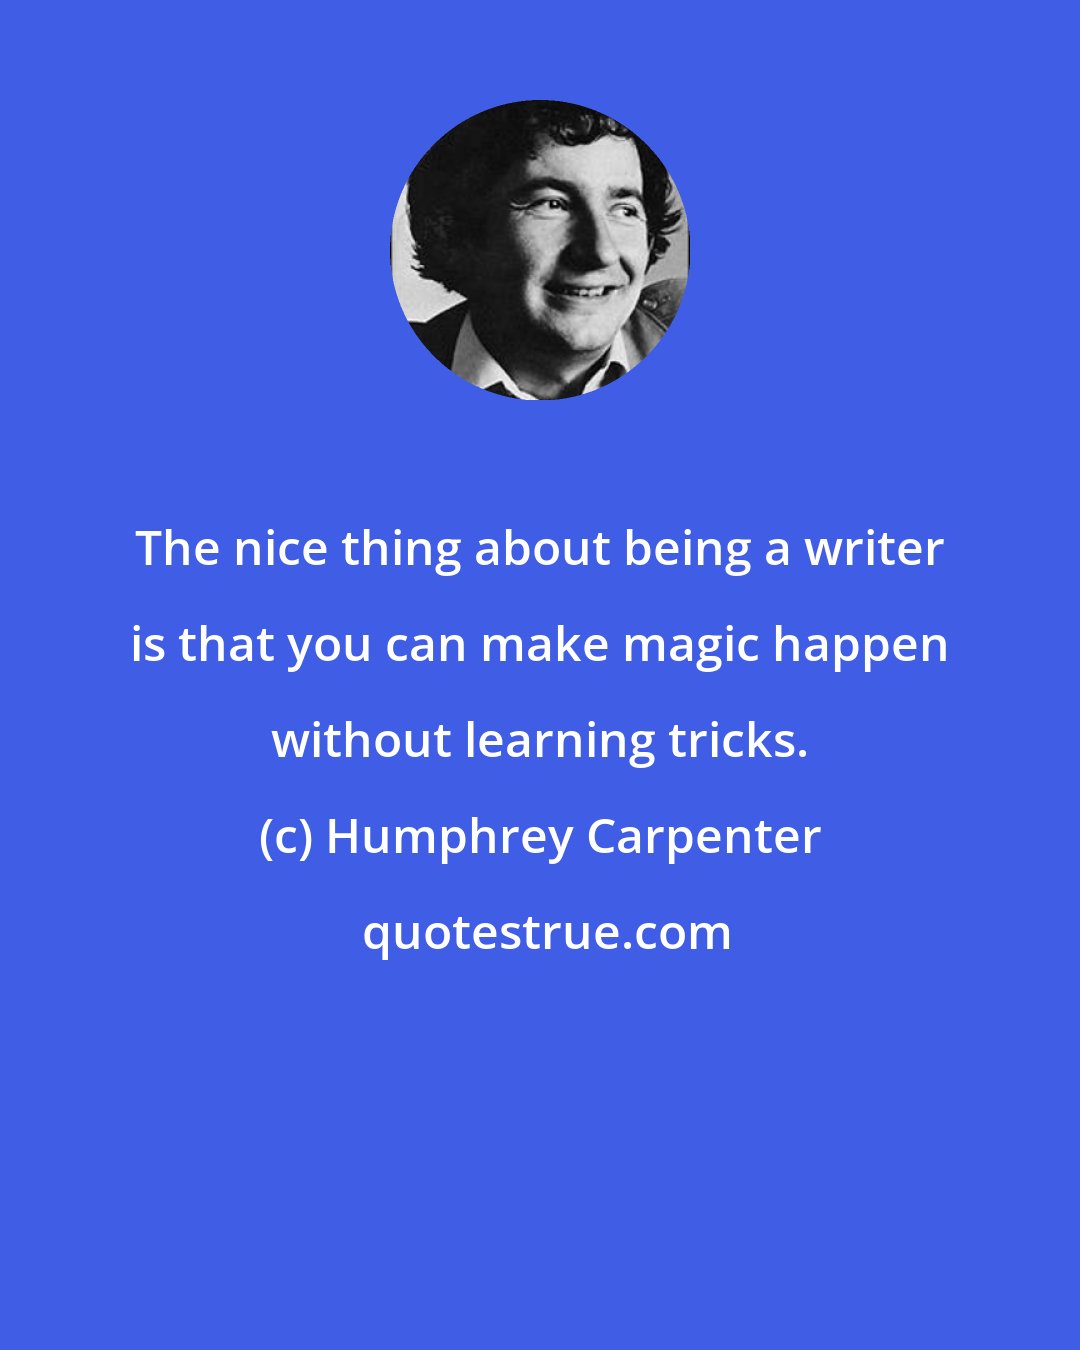 Humphrey Carpenter: The nice thing about being a writer is that you can make magic happen without learning tricks.